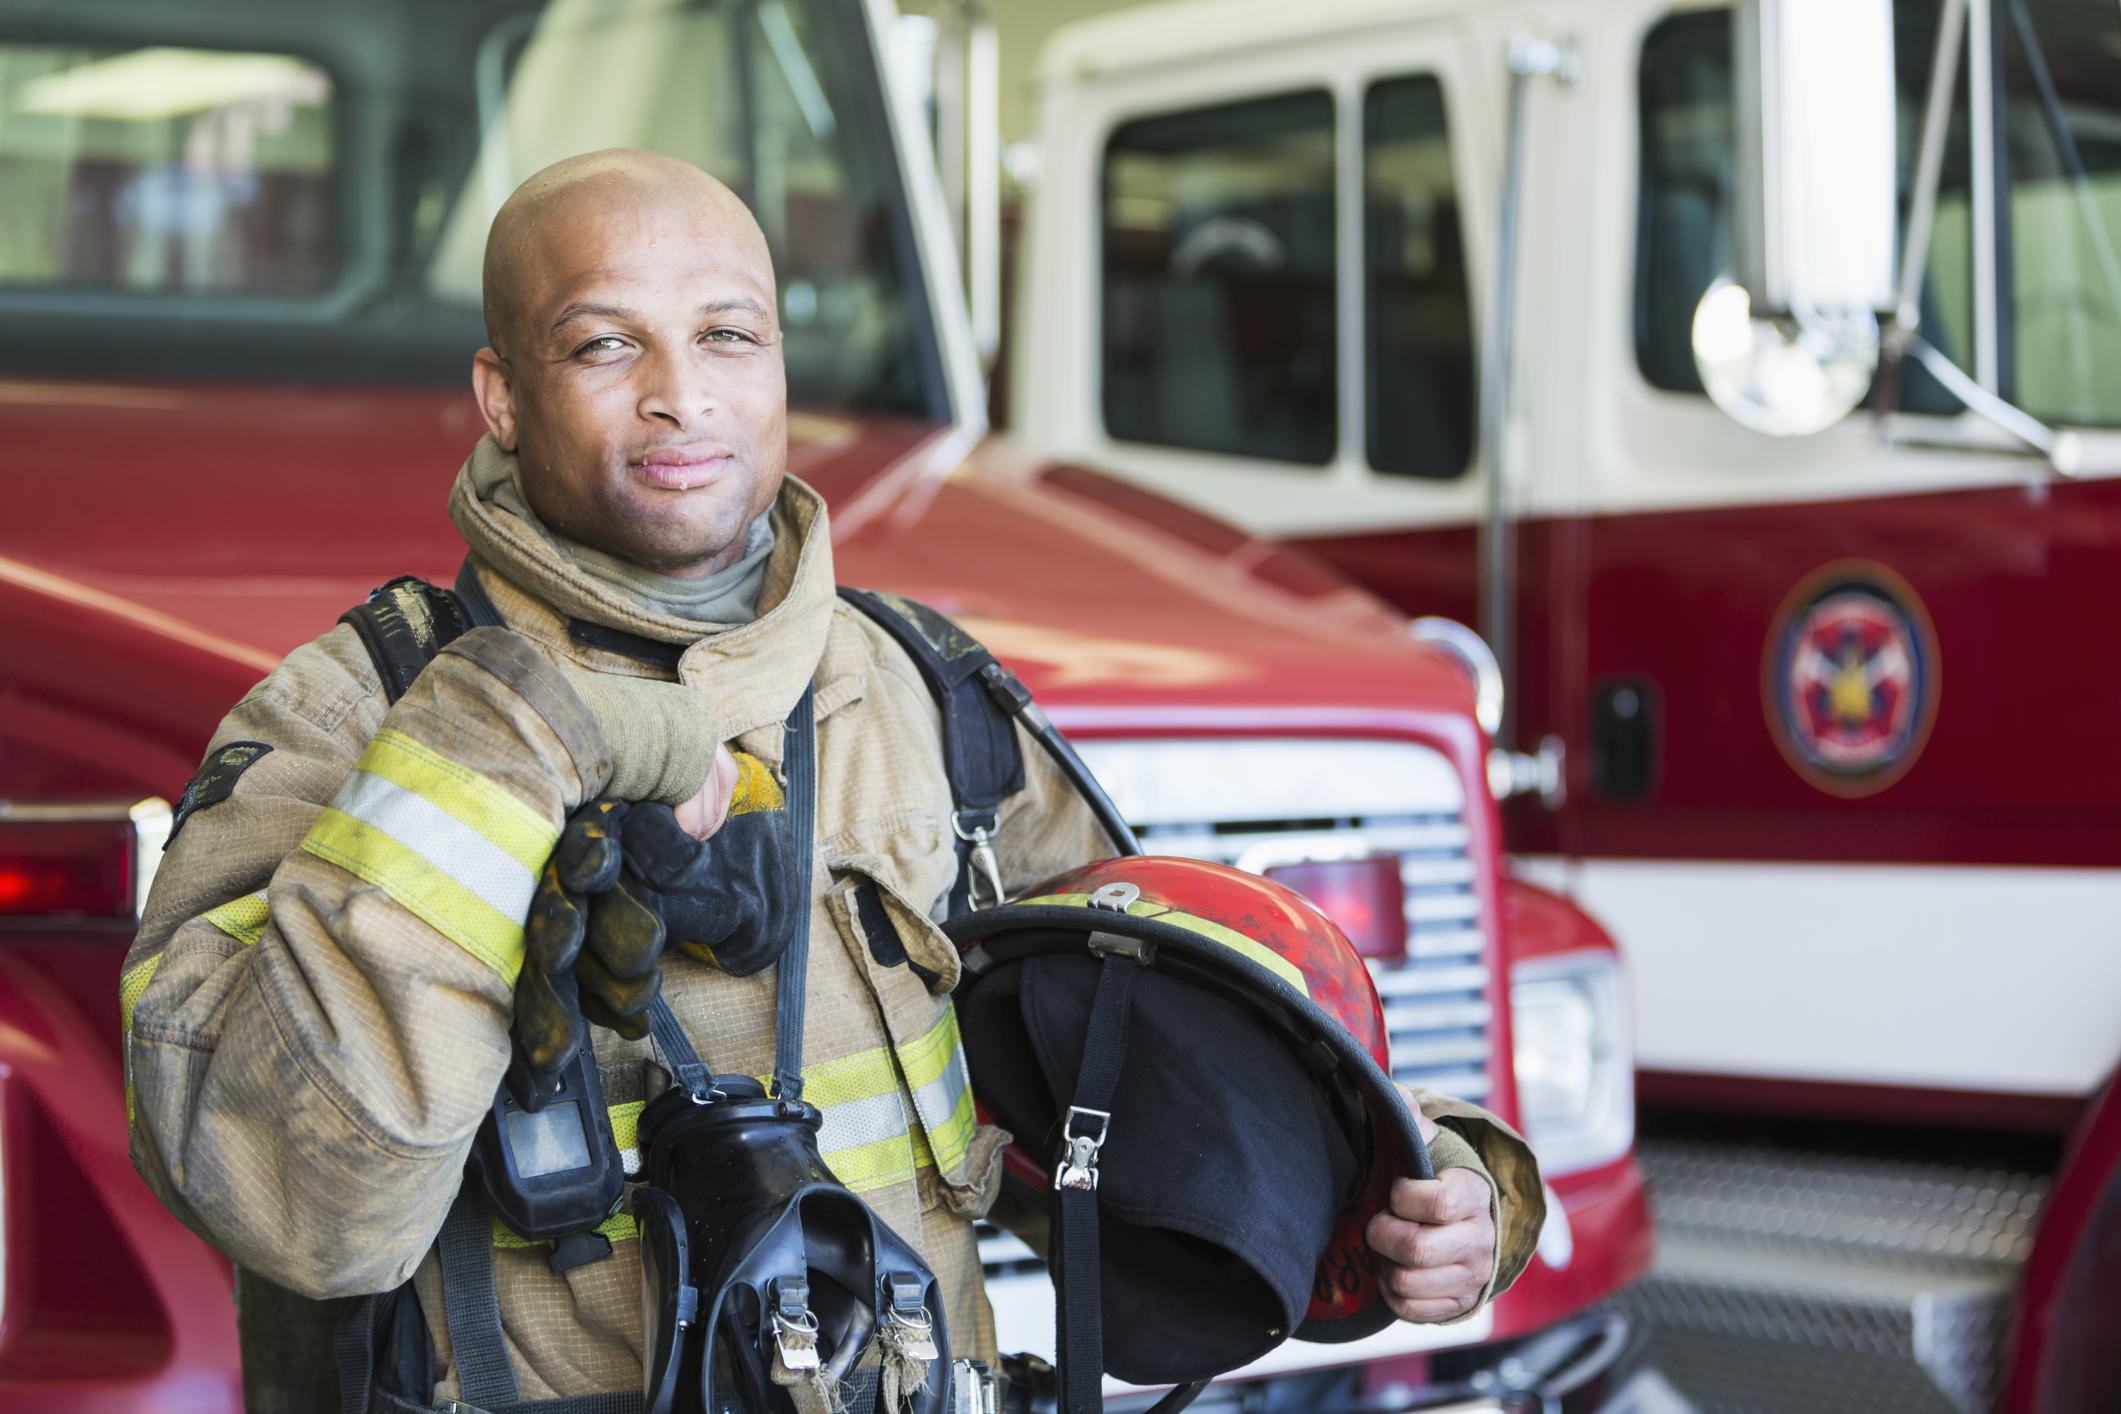 Portrait of an African American fireman standing in front of a fire engine parked at the station. He is serious and confident, wearing protective suit, holding gloves and a helmet. He is ready to respond to an emergency.